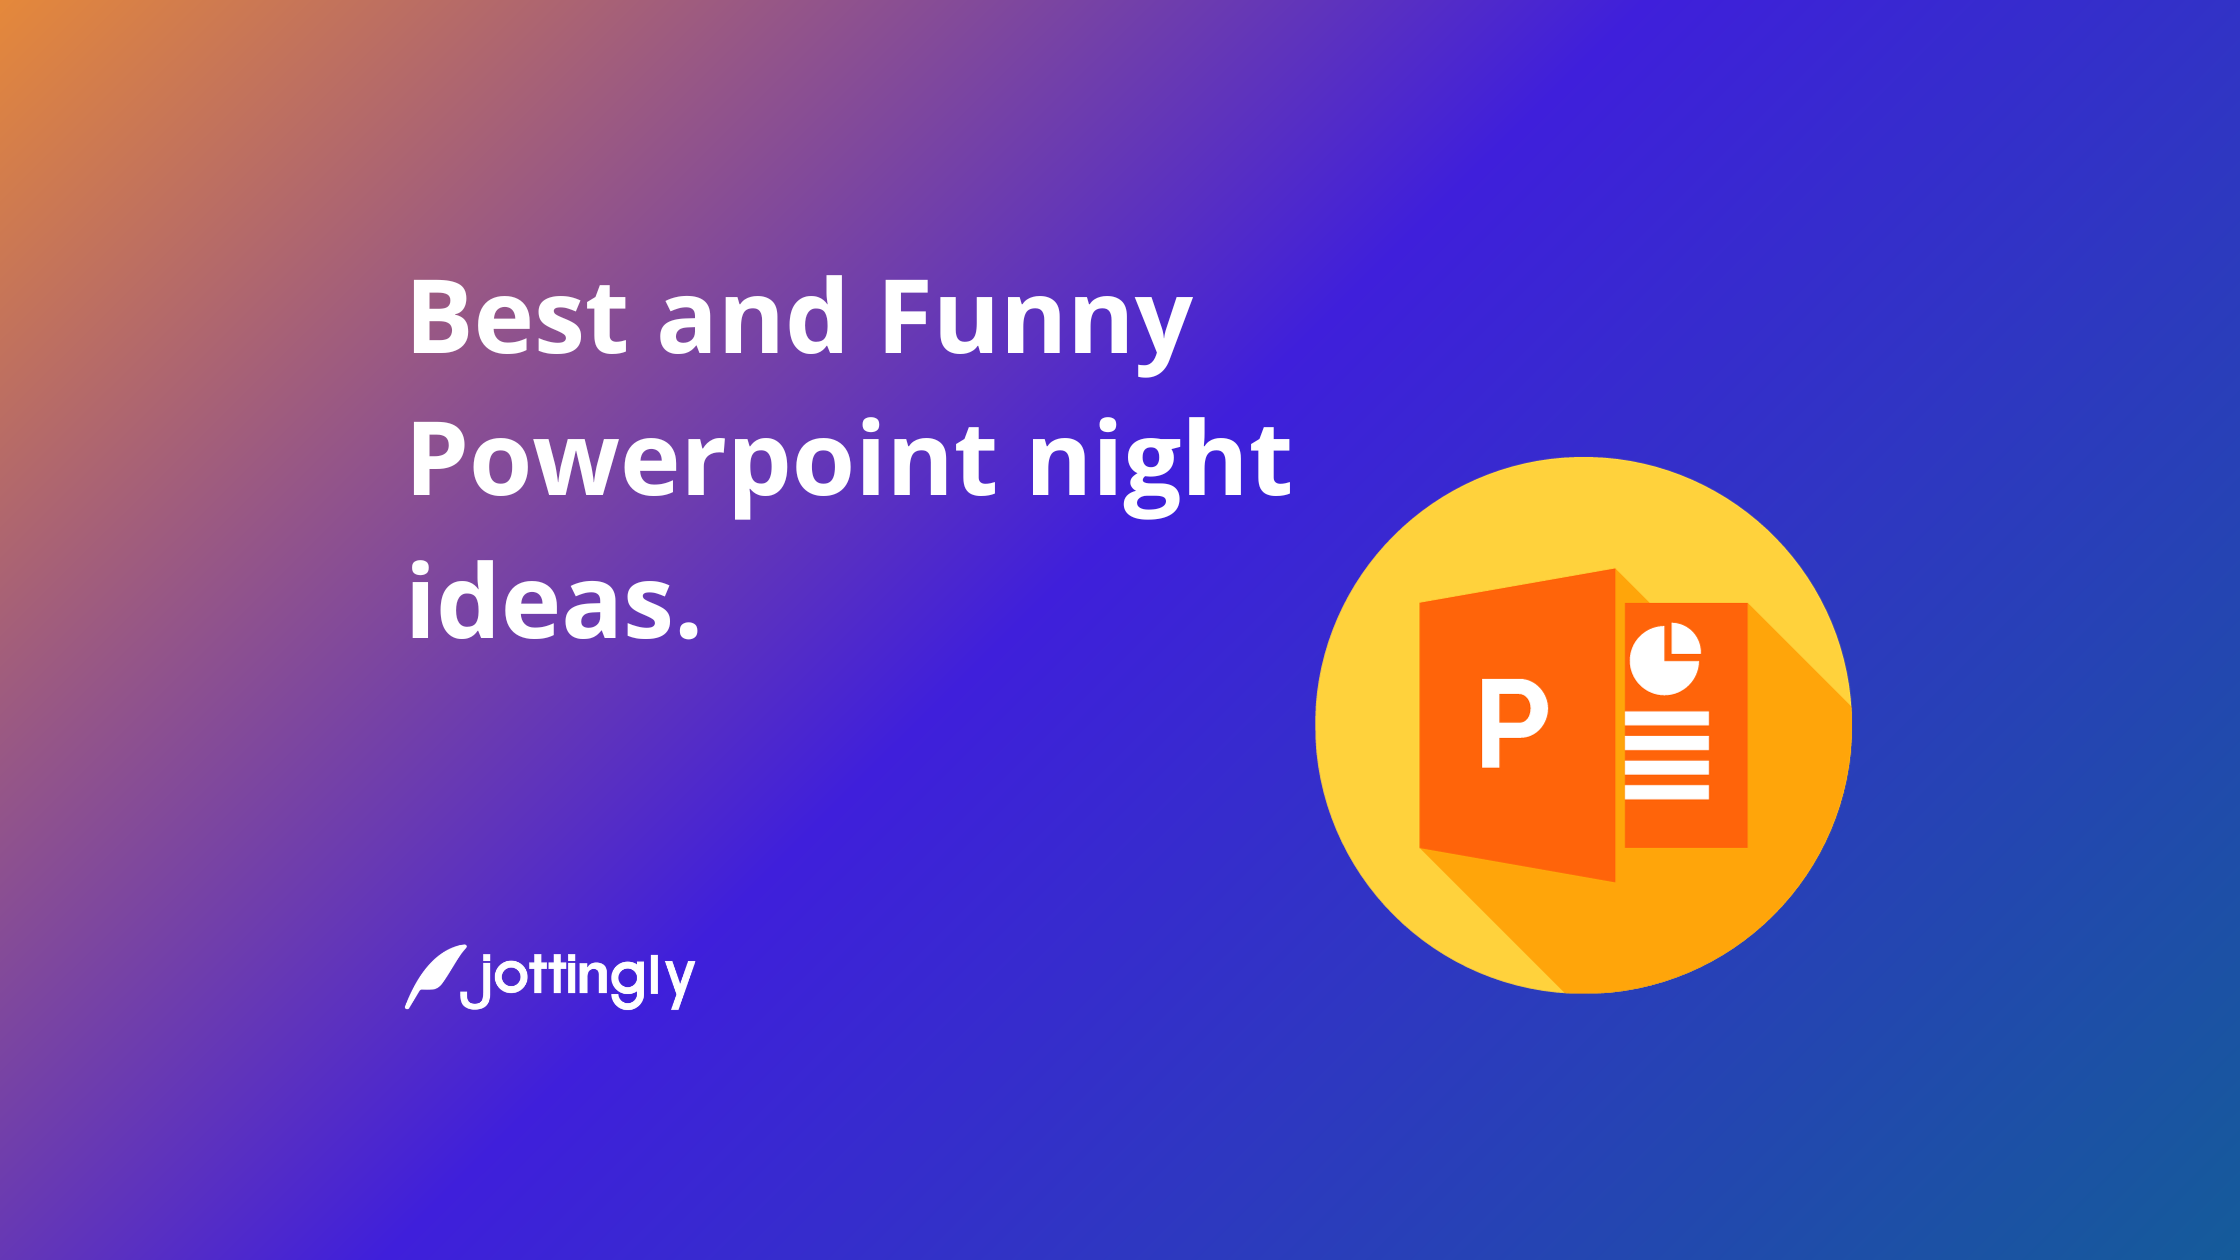 Best and Funny Powerpoint night ideas